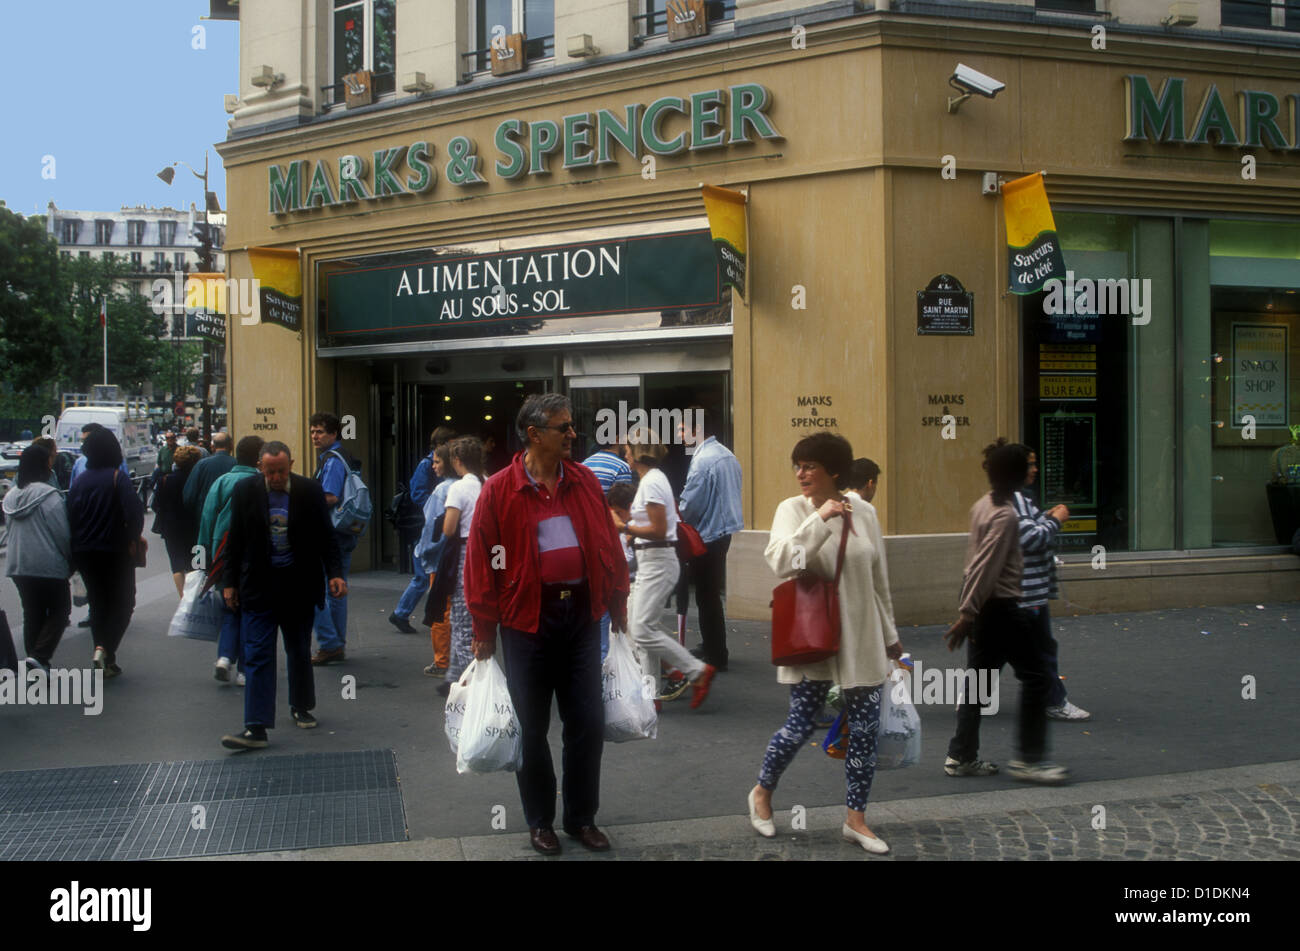 Marks & Spencer in central Paris with people shopping, France Stock Photo